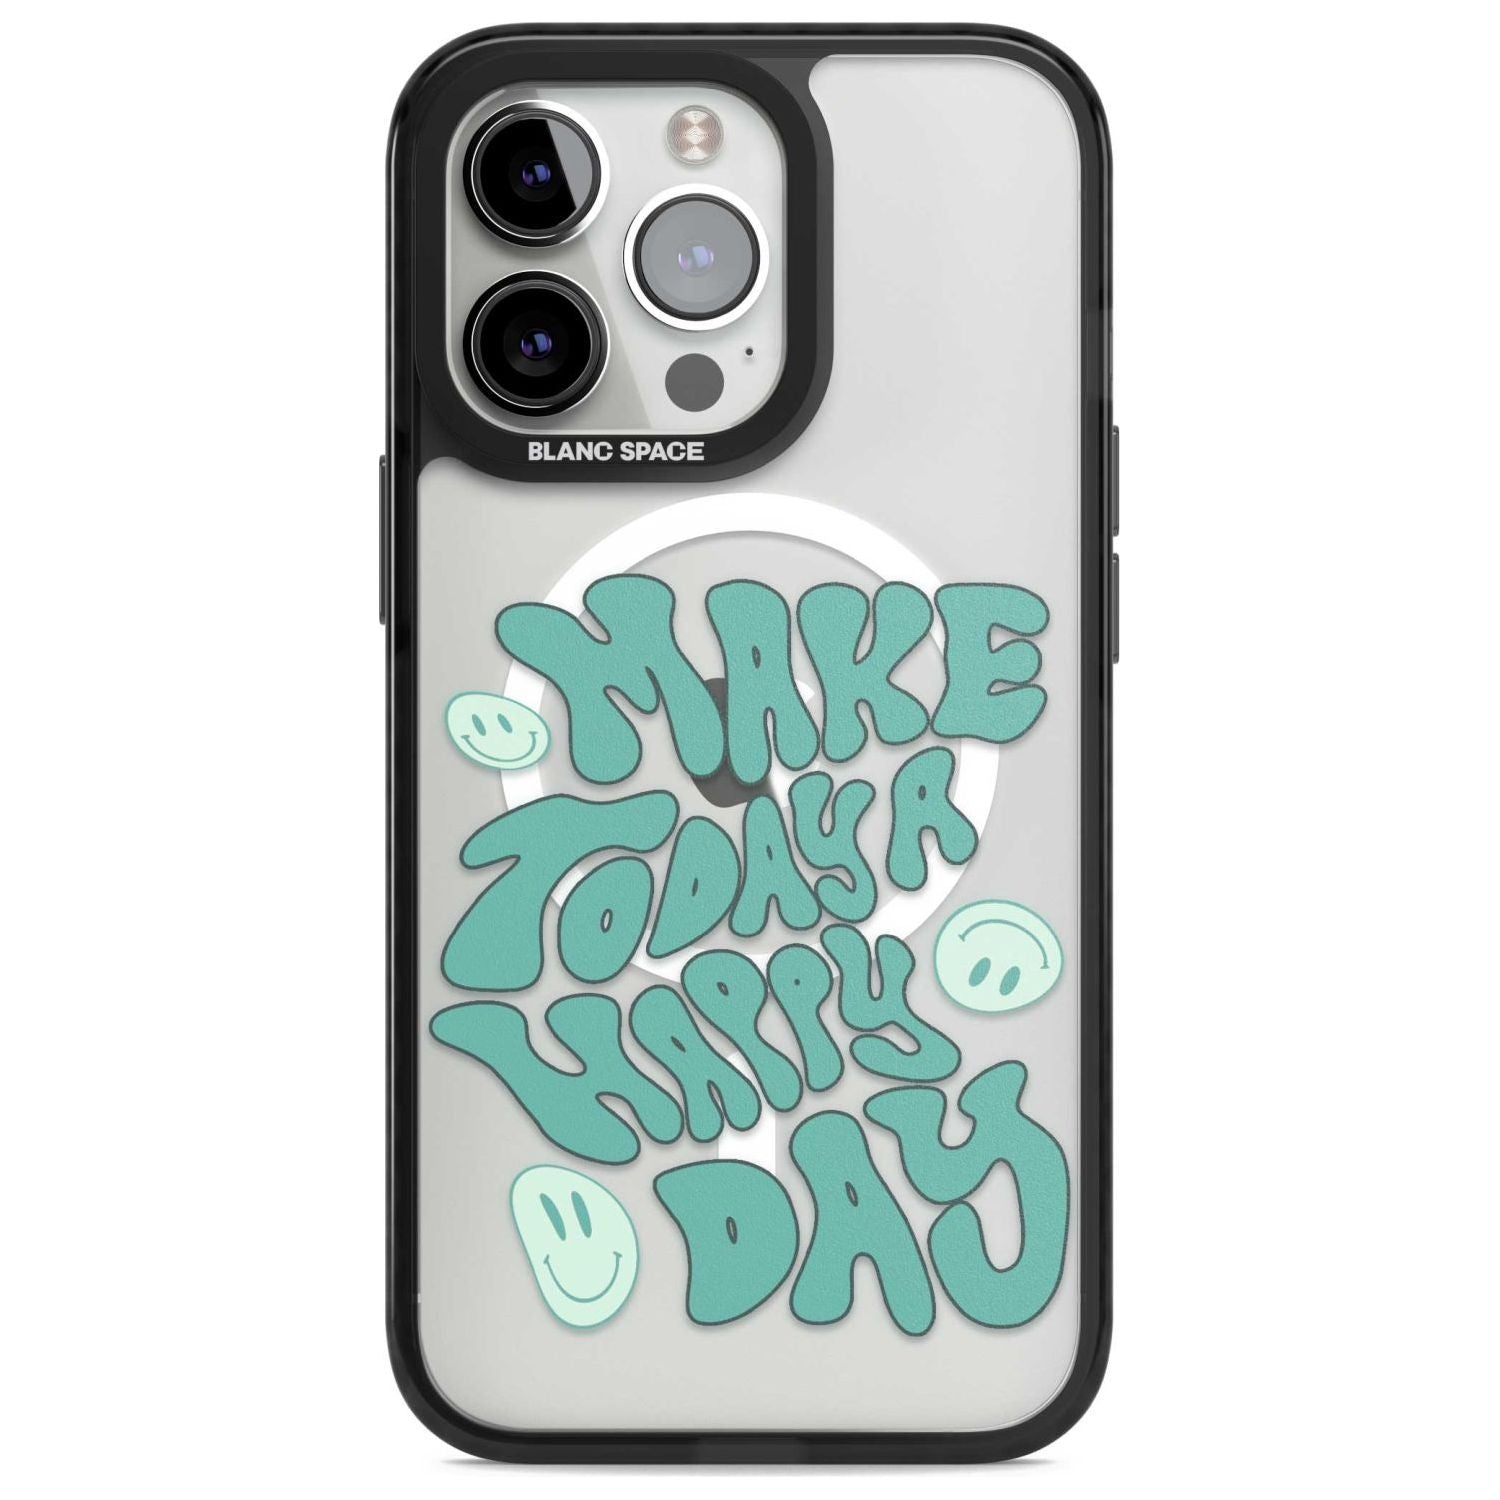 Make Today A Happy Day Phone Case iPhone 15 Pro Max / Magsafe Black Impact Case,iPhone 15 Pro / Magsafe Black Impact Case,iPhone 14 Pro Max / Magsafe Black Impact Case,iPhone 14 Pro / Magsafe Black Impact Case,iPhone 13 Pro / Magsafe Black Impact Case Blanc Space